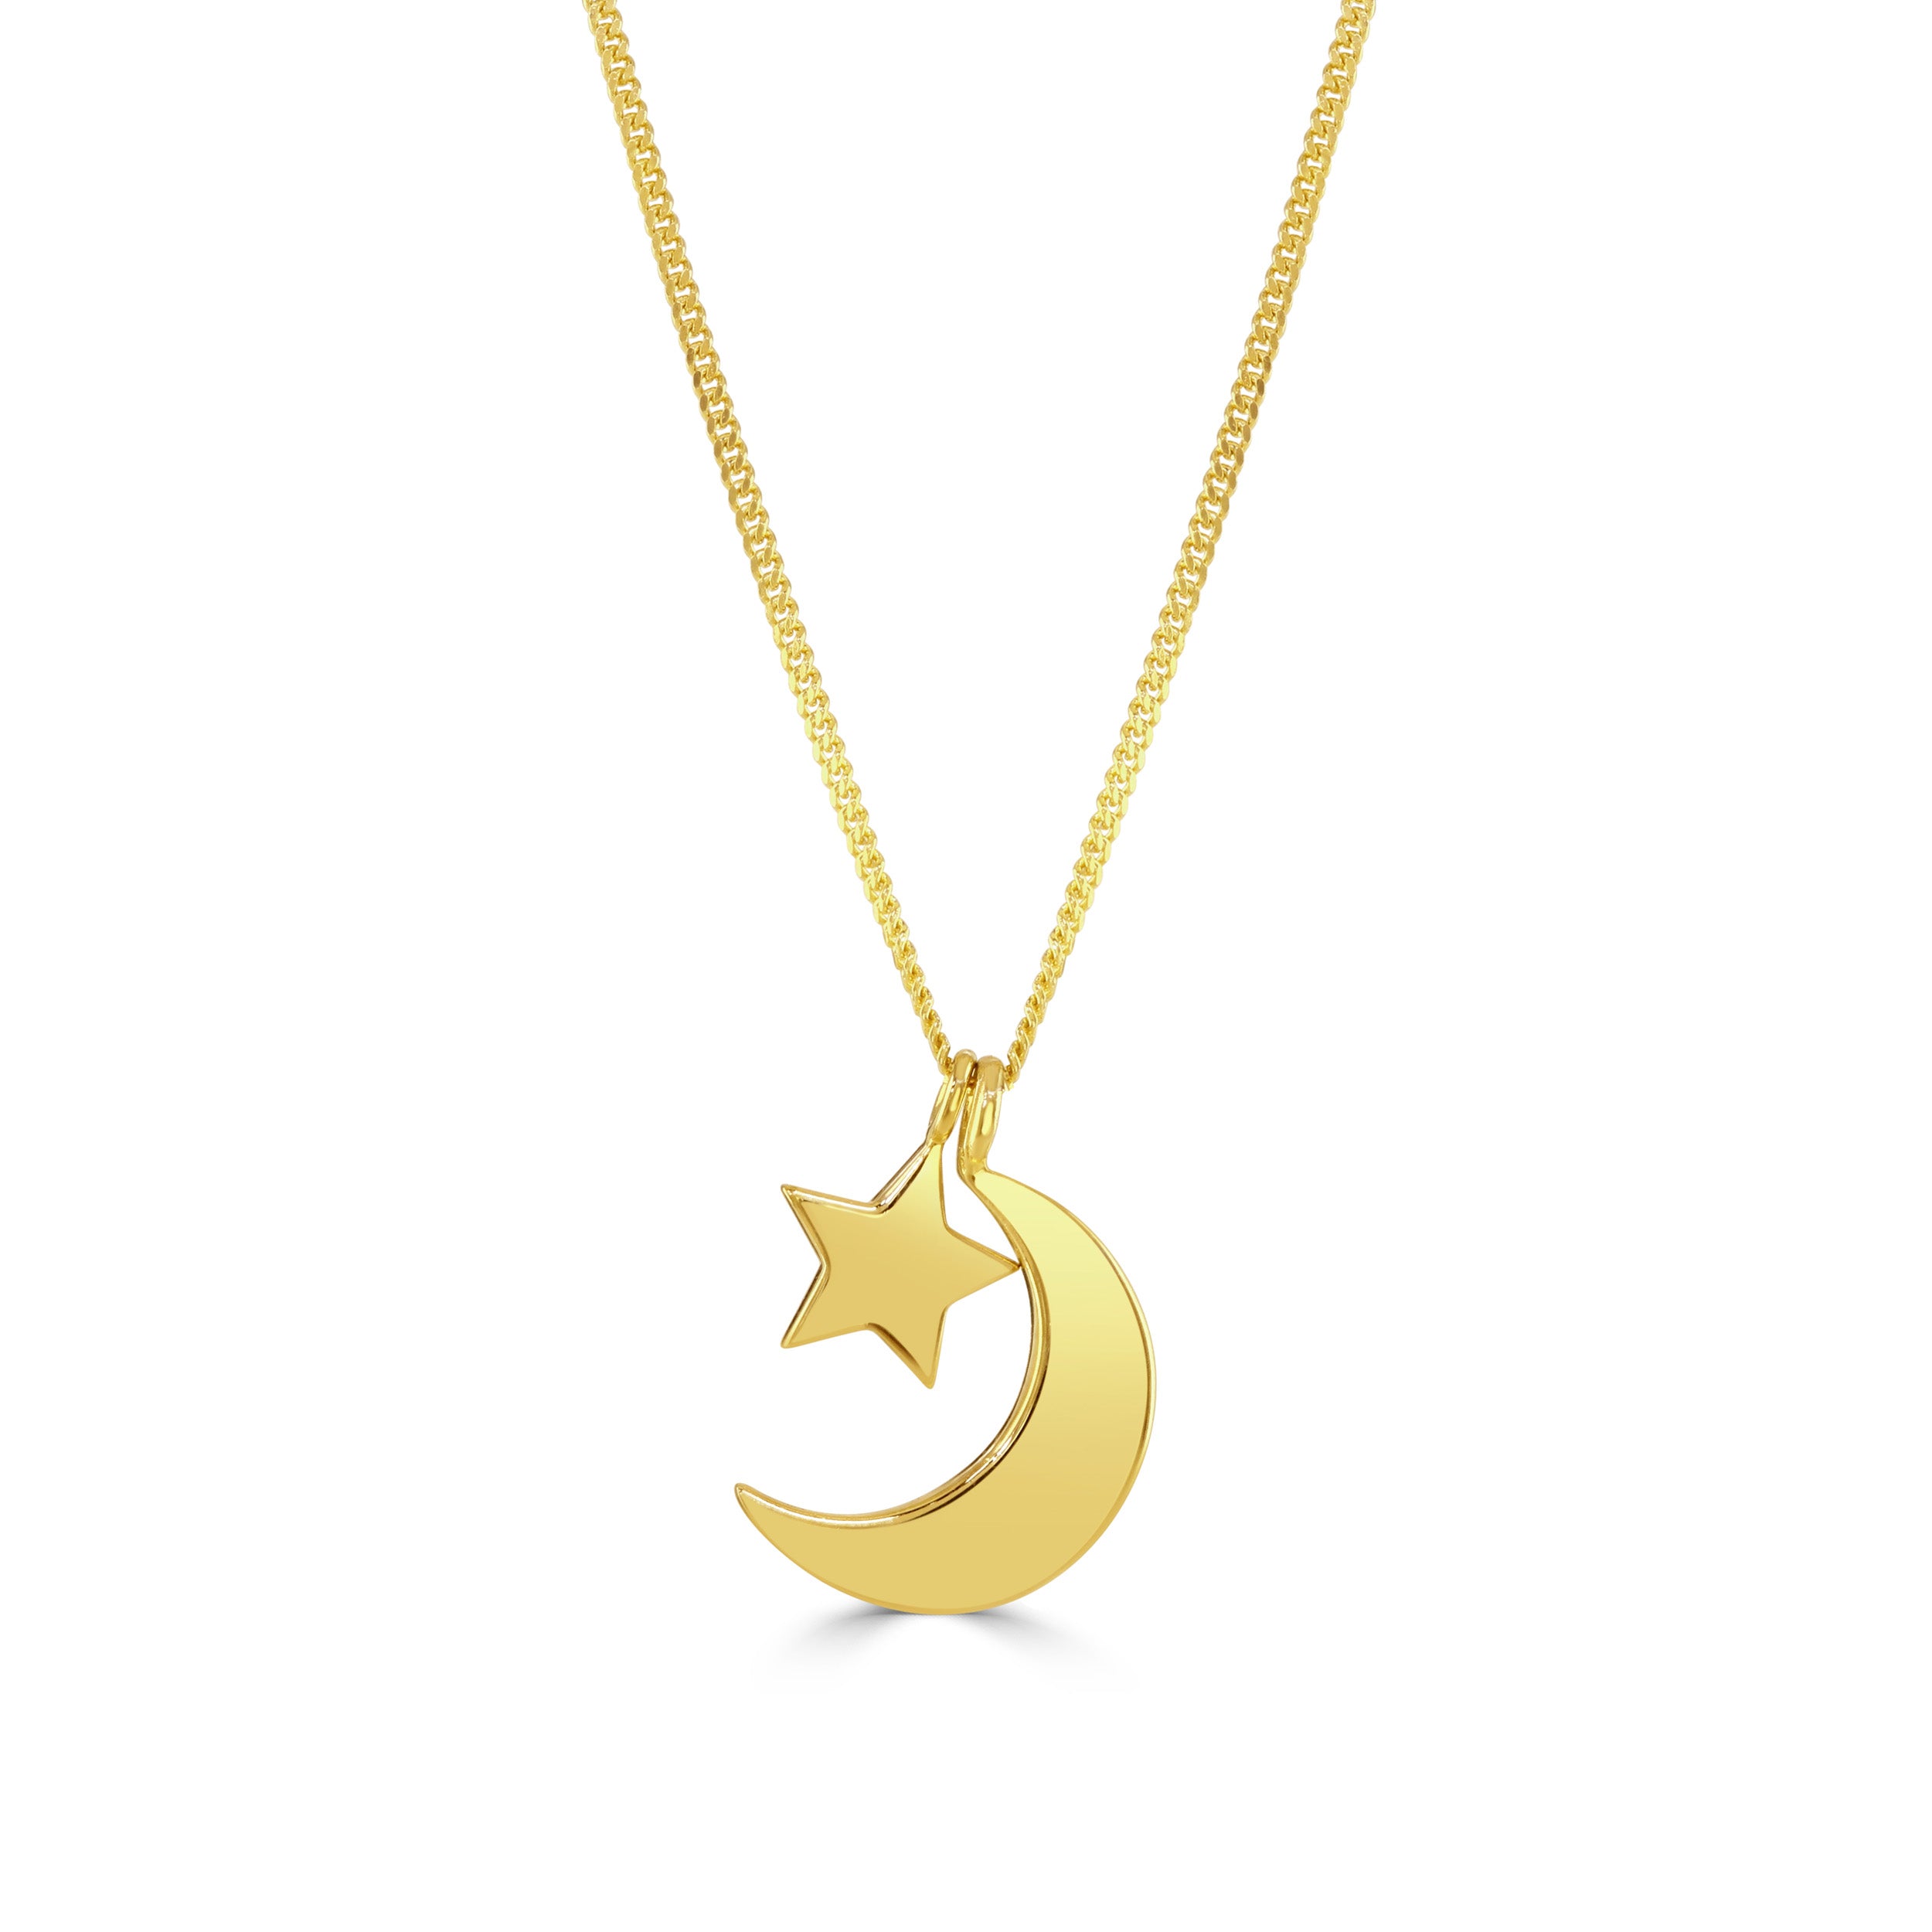 Gold Dainty Moon & Star Necklace